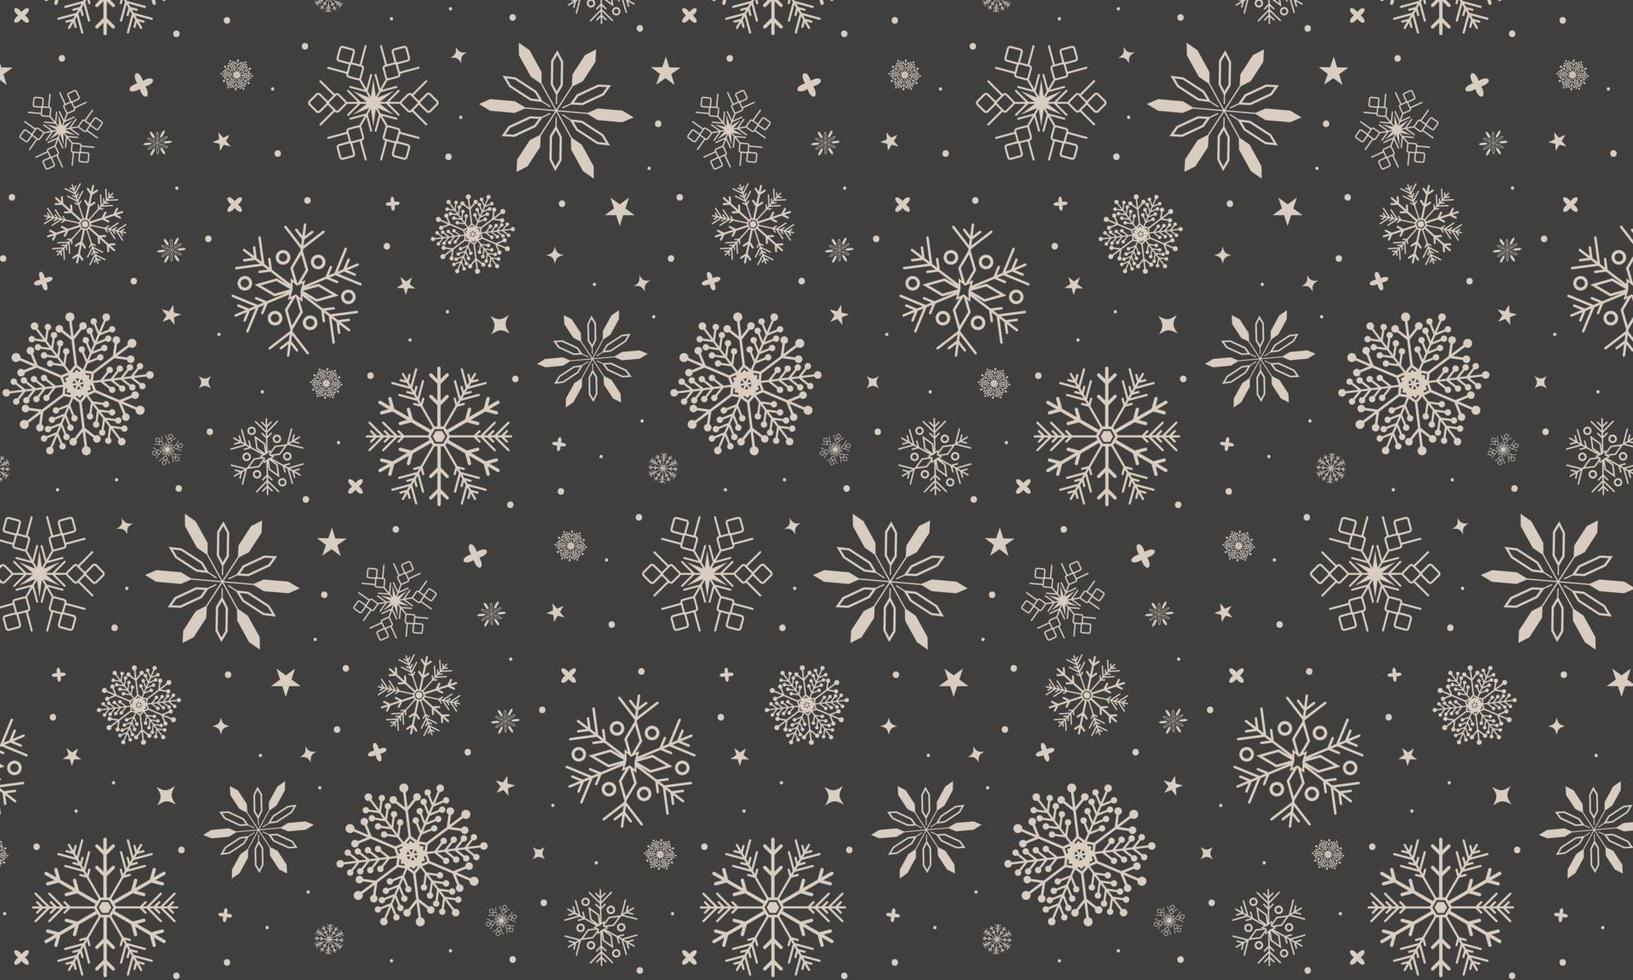 Snowflake decoration pattern. Snowfall background vector